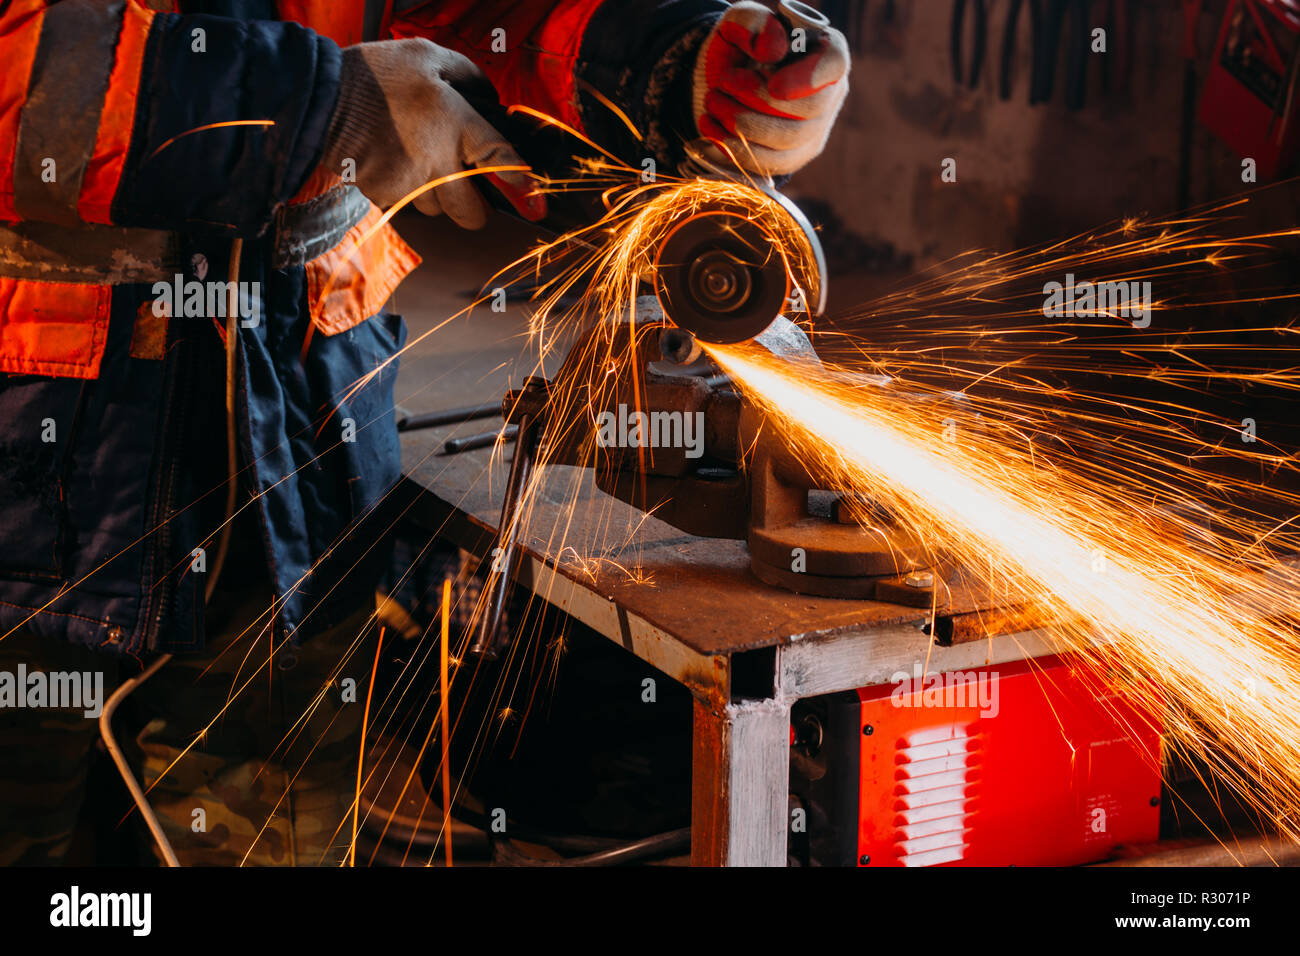 Worker cutting metal with grinder in his workshop. Sparks while grinding iron. Stock Photo